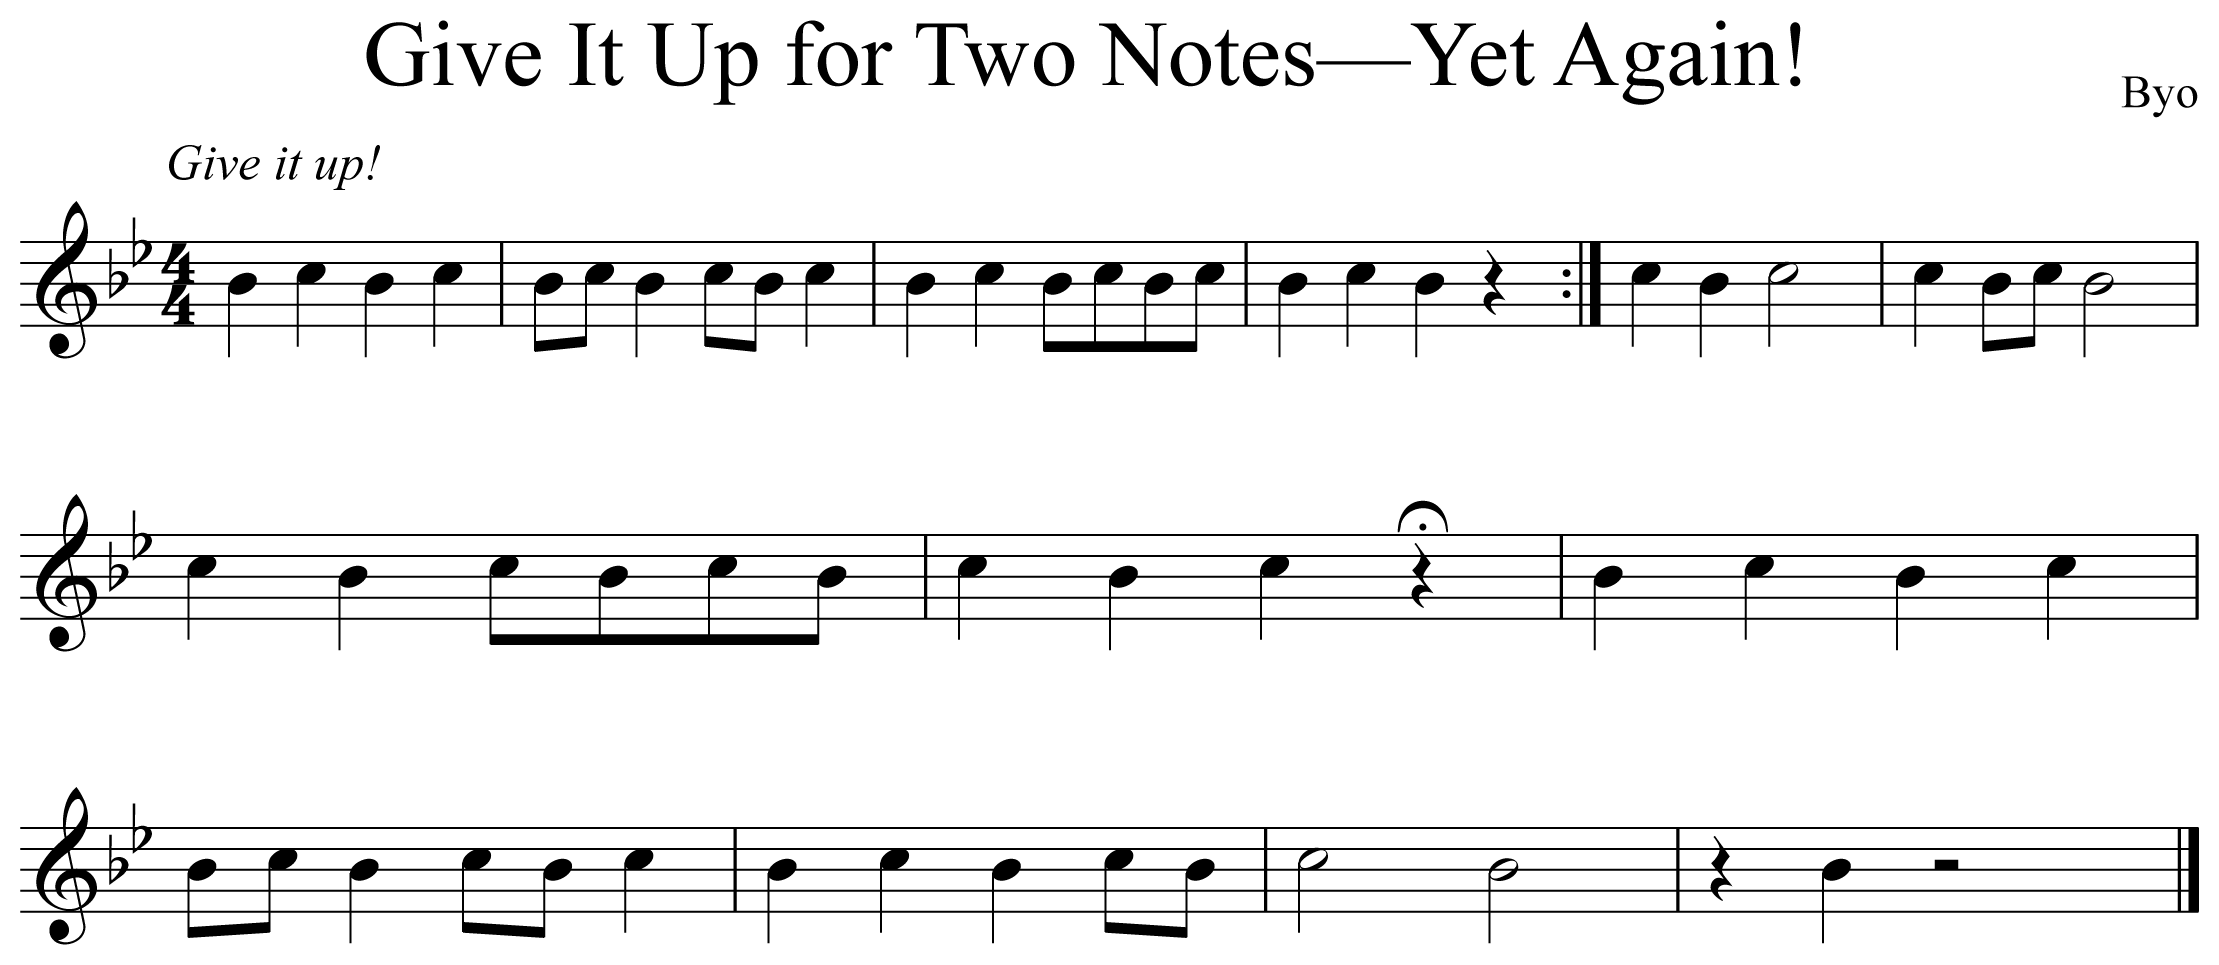 Give it up for Two Notes Yet Again Notation Flute